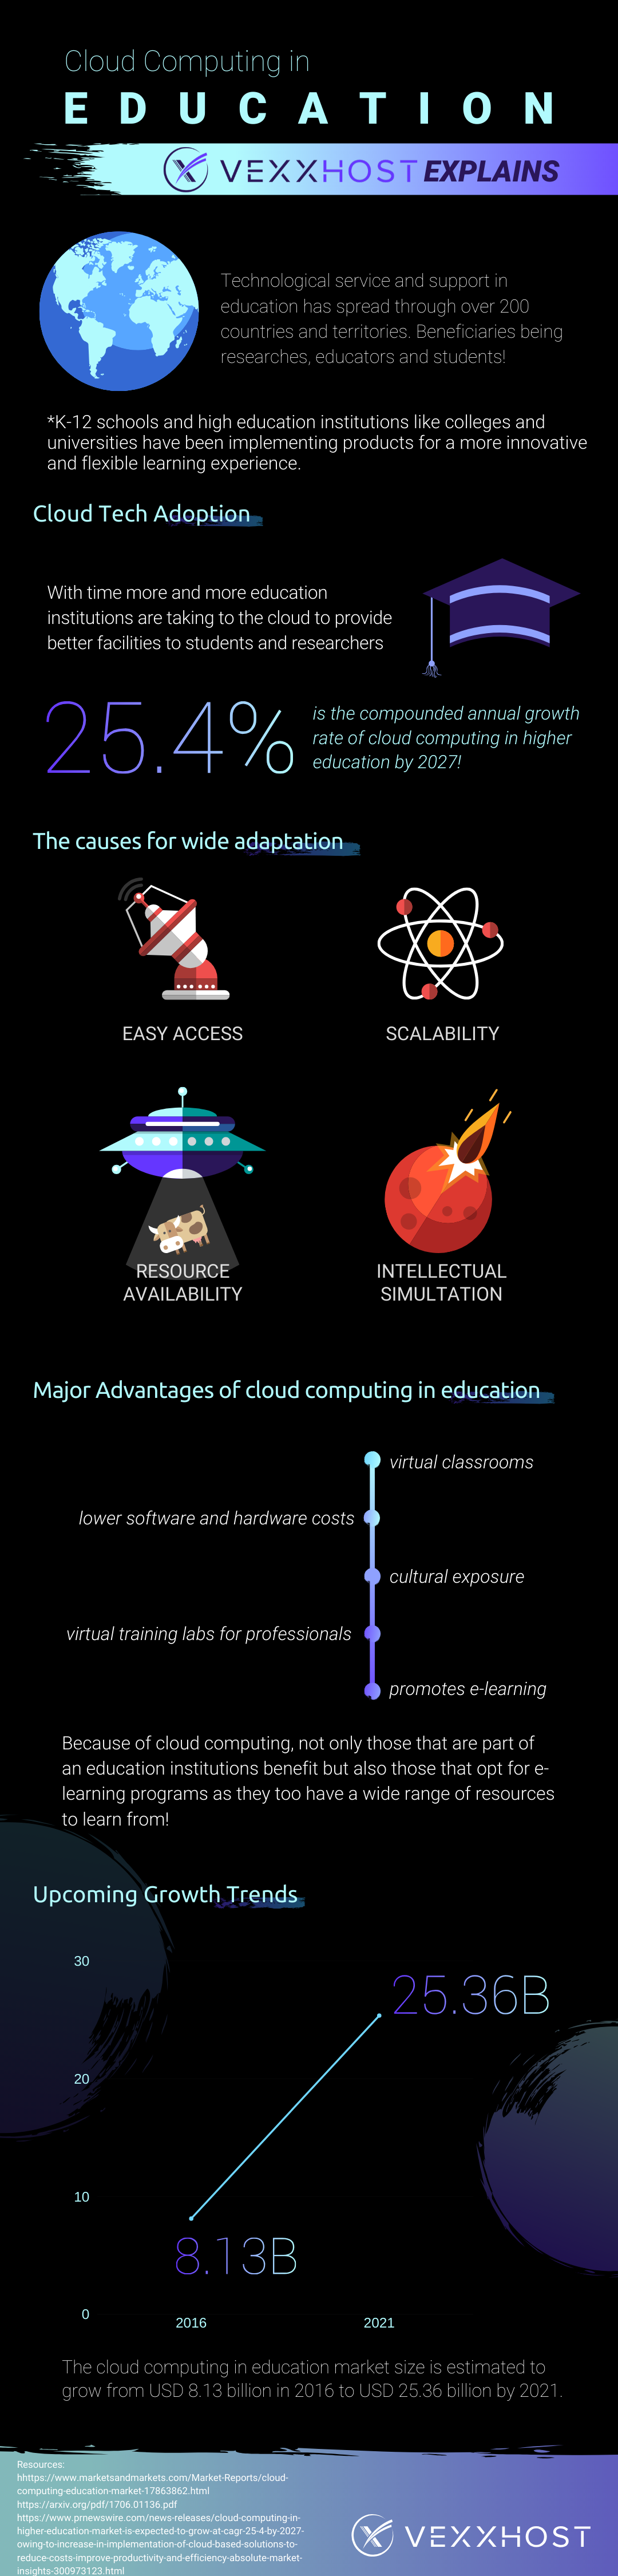 The Benefits Of Cloud Computing In Education | VEXXHOST